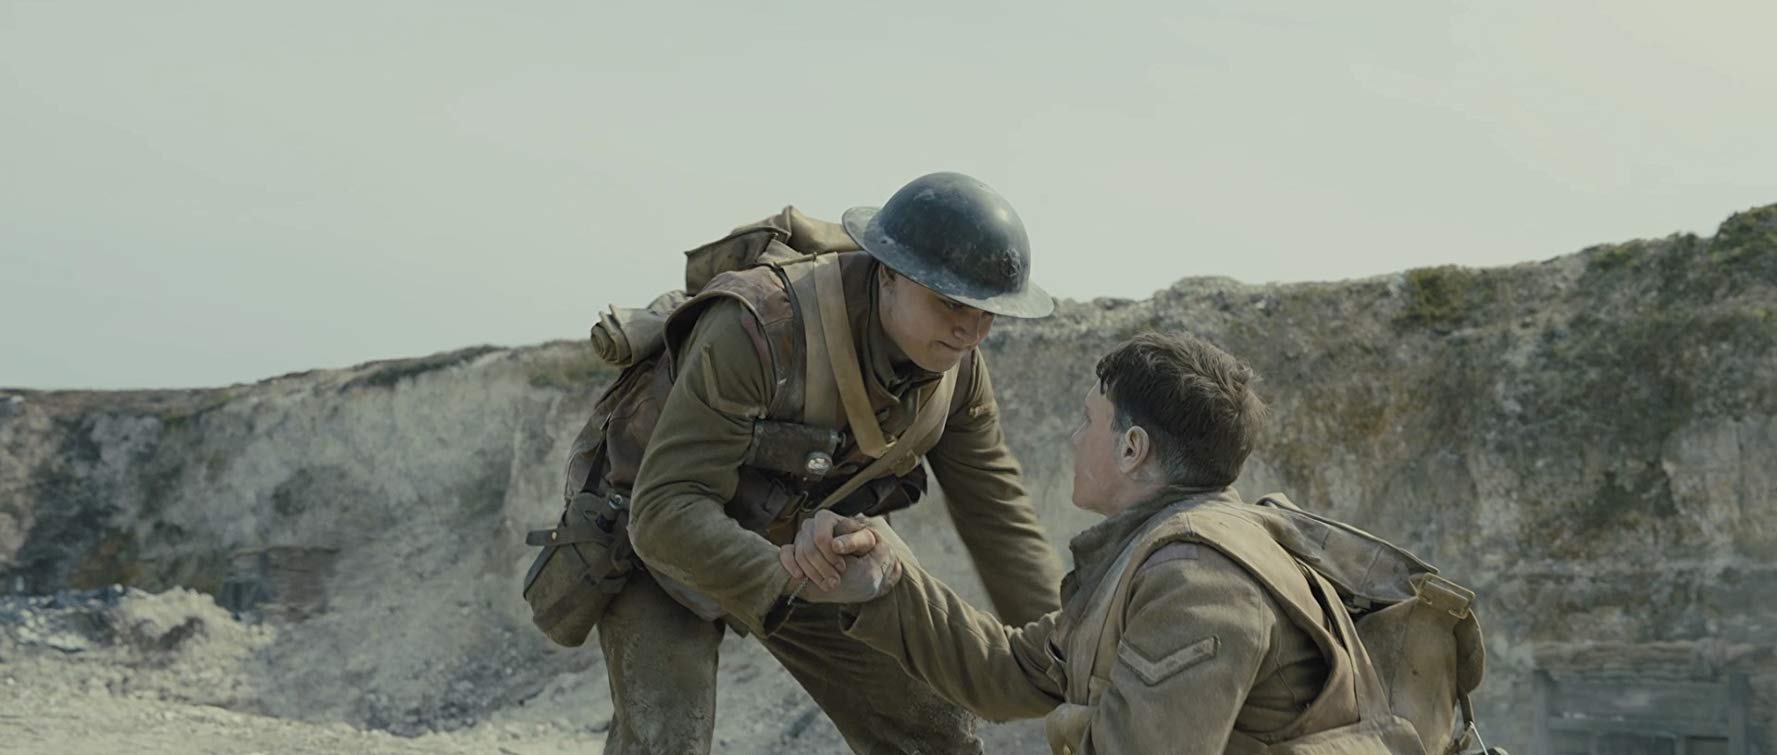 Dean-Charles Chapman and George MacKay in 1917 directed by Sam Mendes.